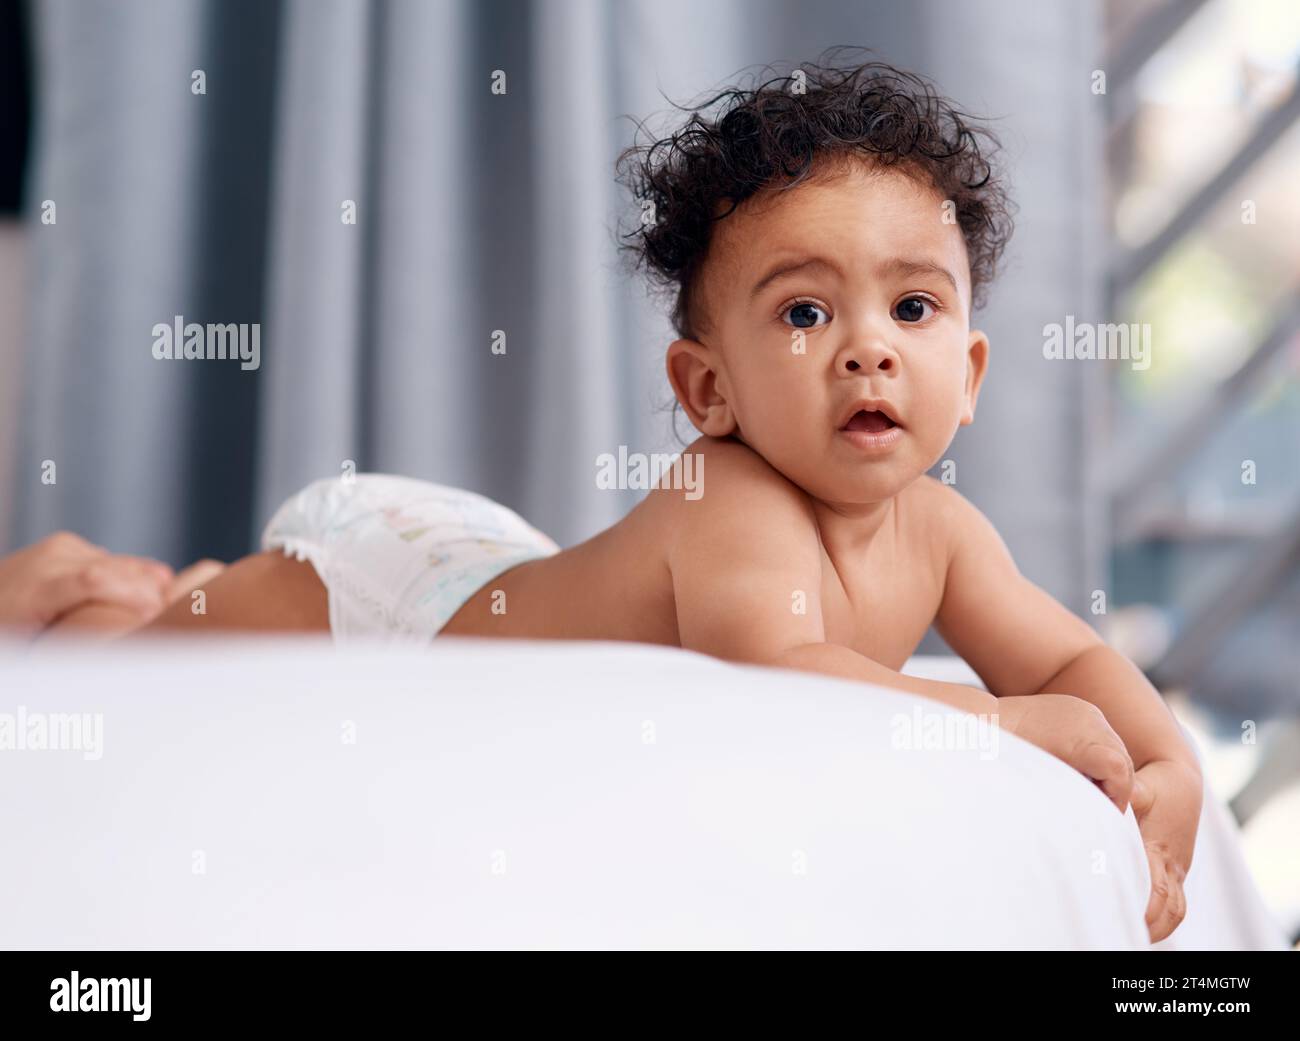 Life got a lot cuter when I came along. an adorable baby boy on the bed at home. Stock Photo